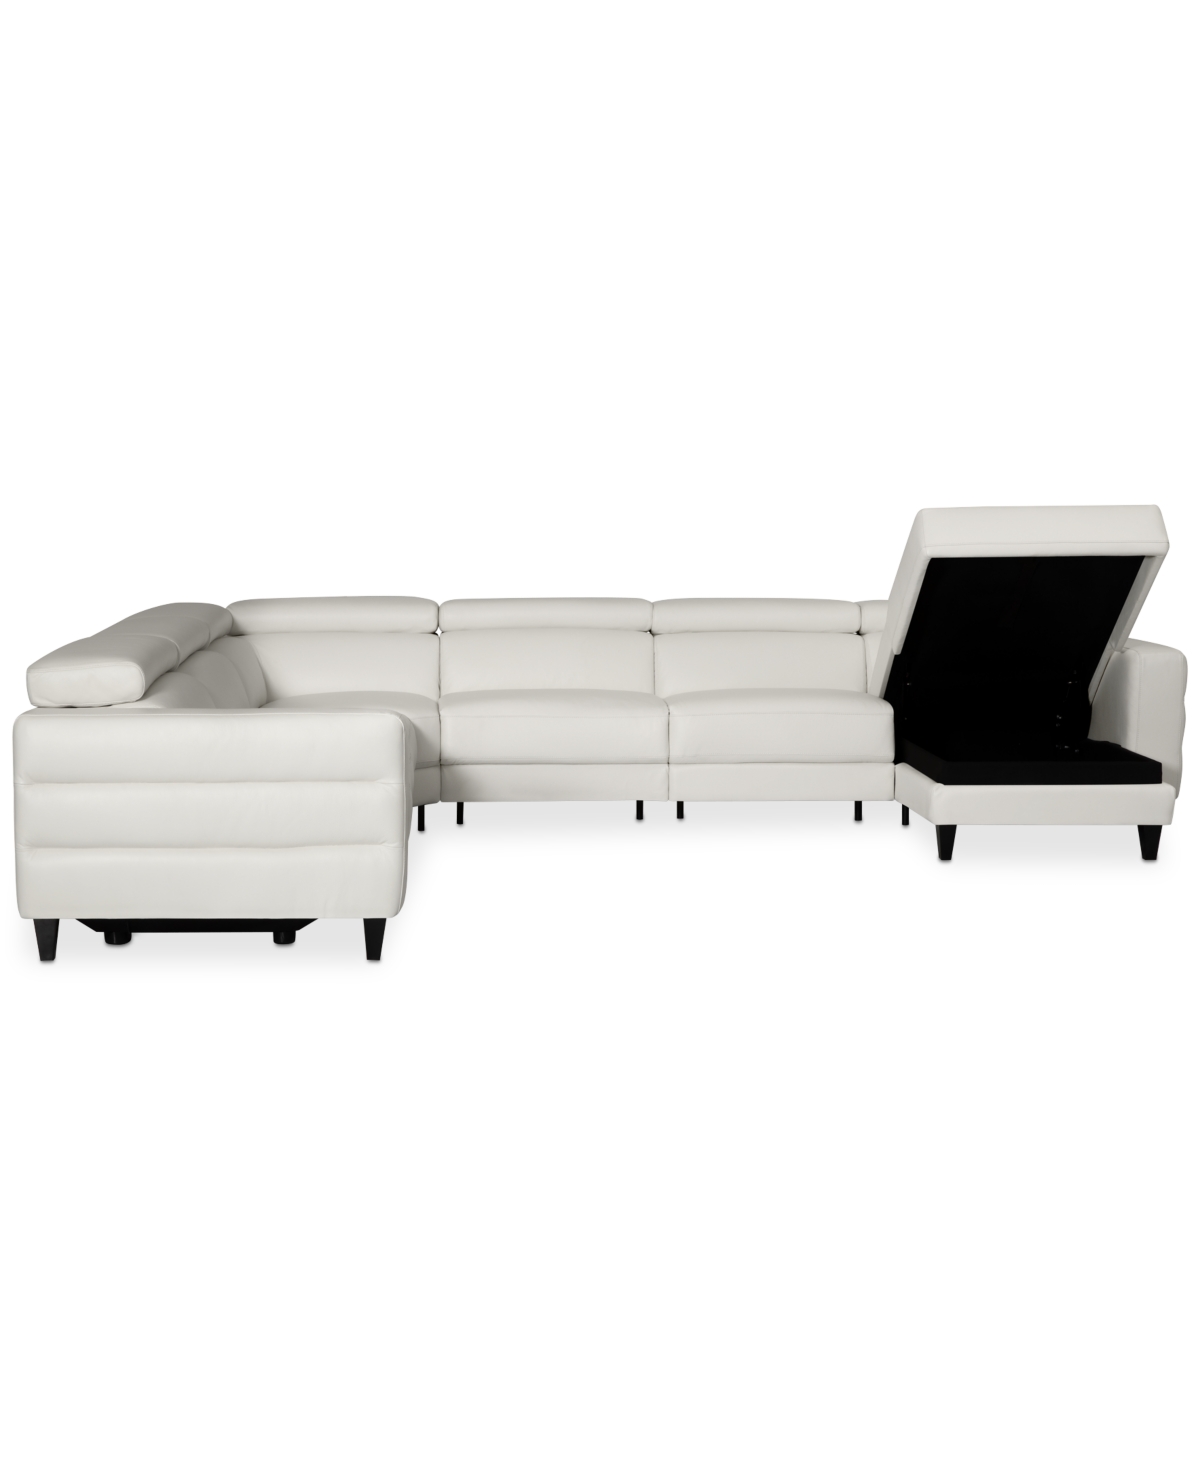 Shop Furniture Silvanah 6-pc. Leather Sectional With Storage Chaise And 2 Power Recliners, Created For Macy's In Snow